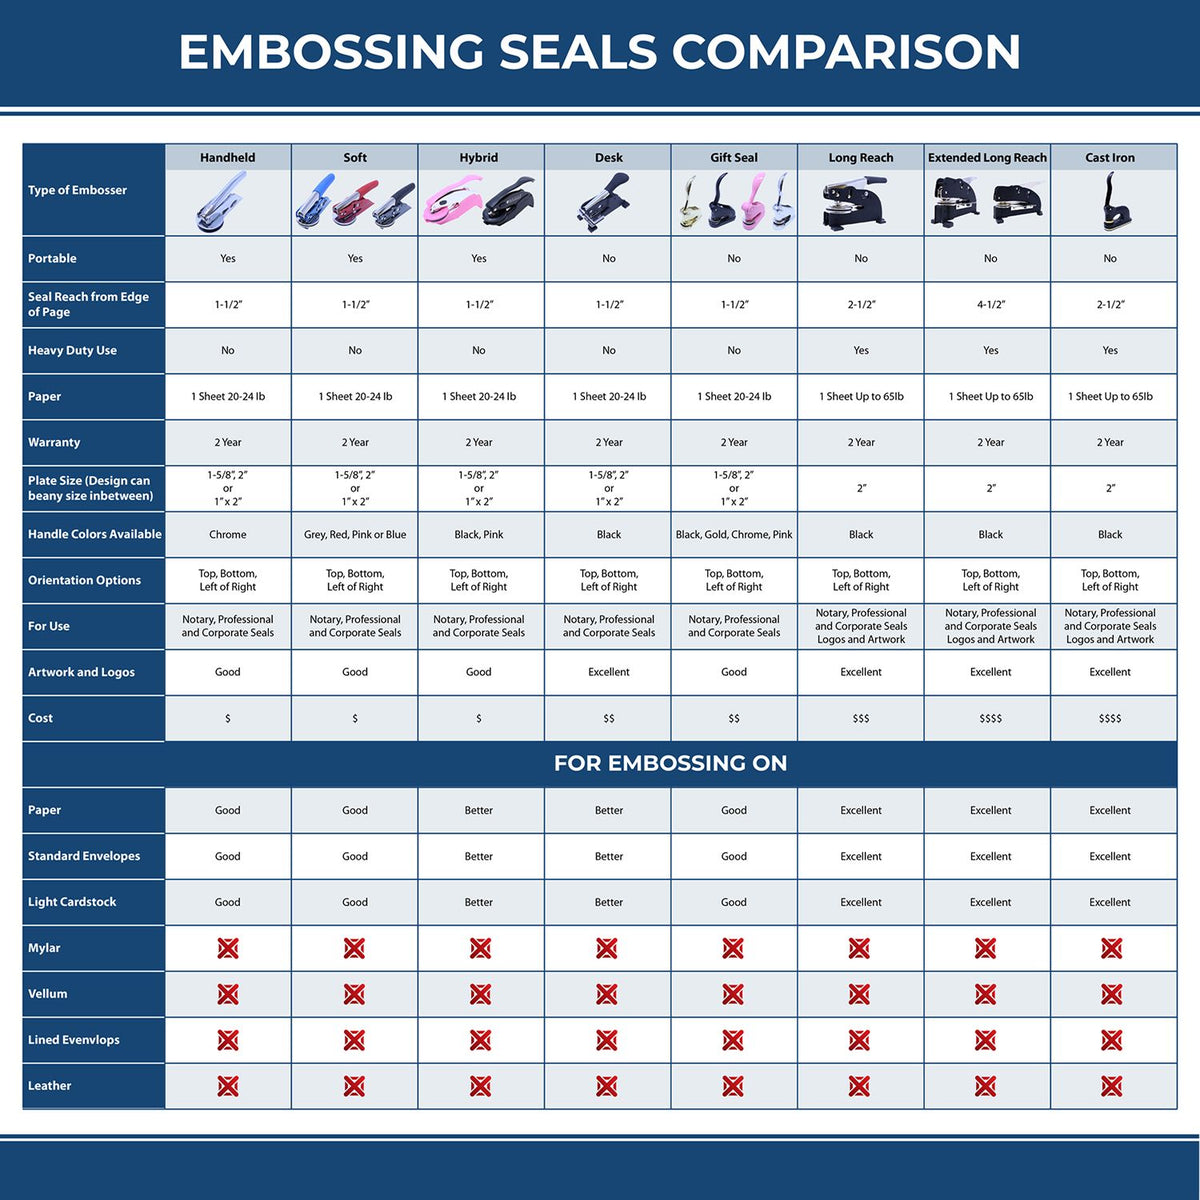 A comparison chart for the different types of mount models available for the Hybrid Iowa Geologist Seal